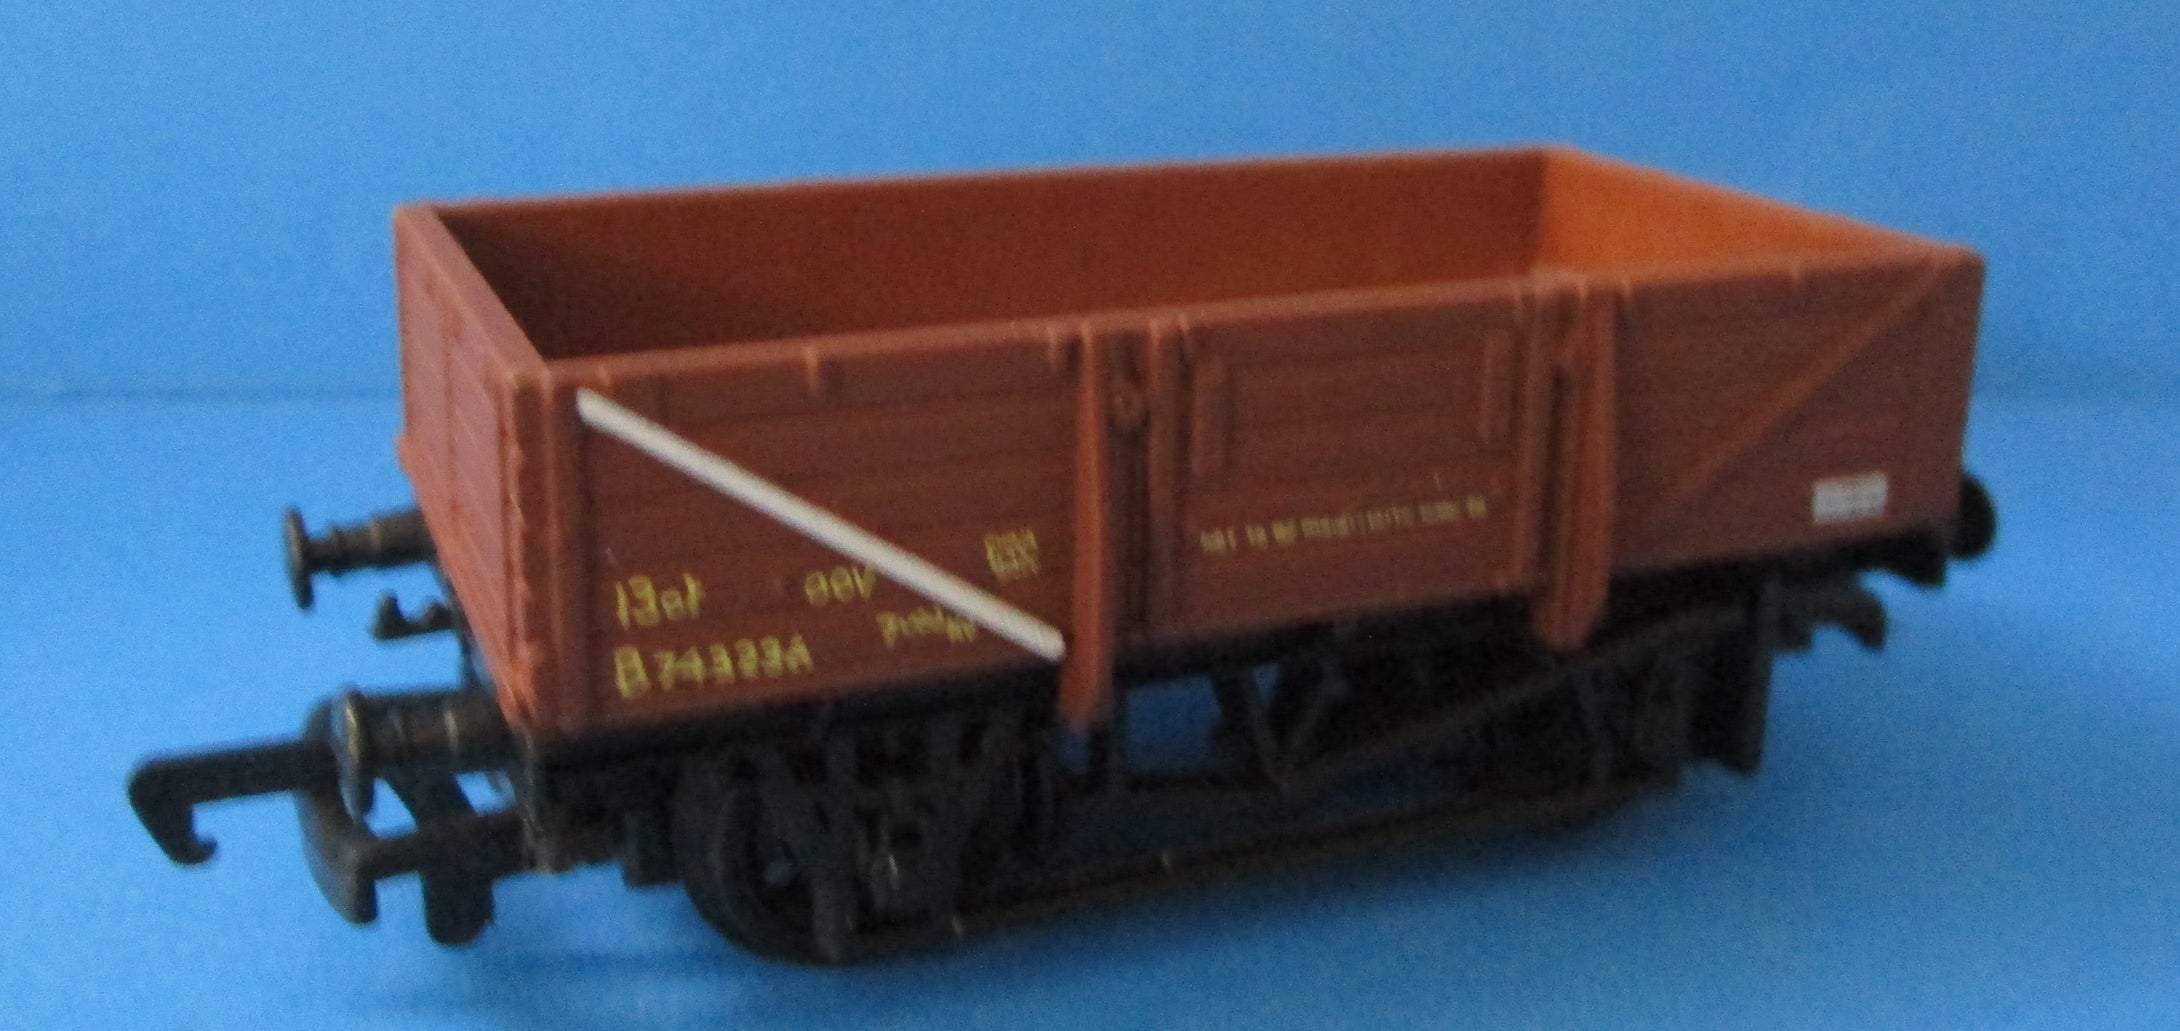 33-077 BACHMANN  5 Plank China Clay Wagon without Hood B743236 in BR Brown Livery. - BOXED